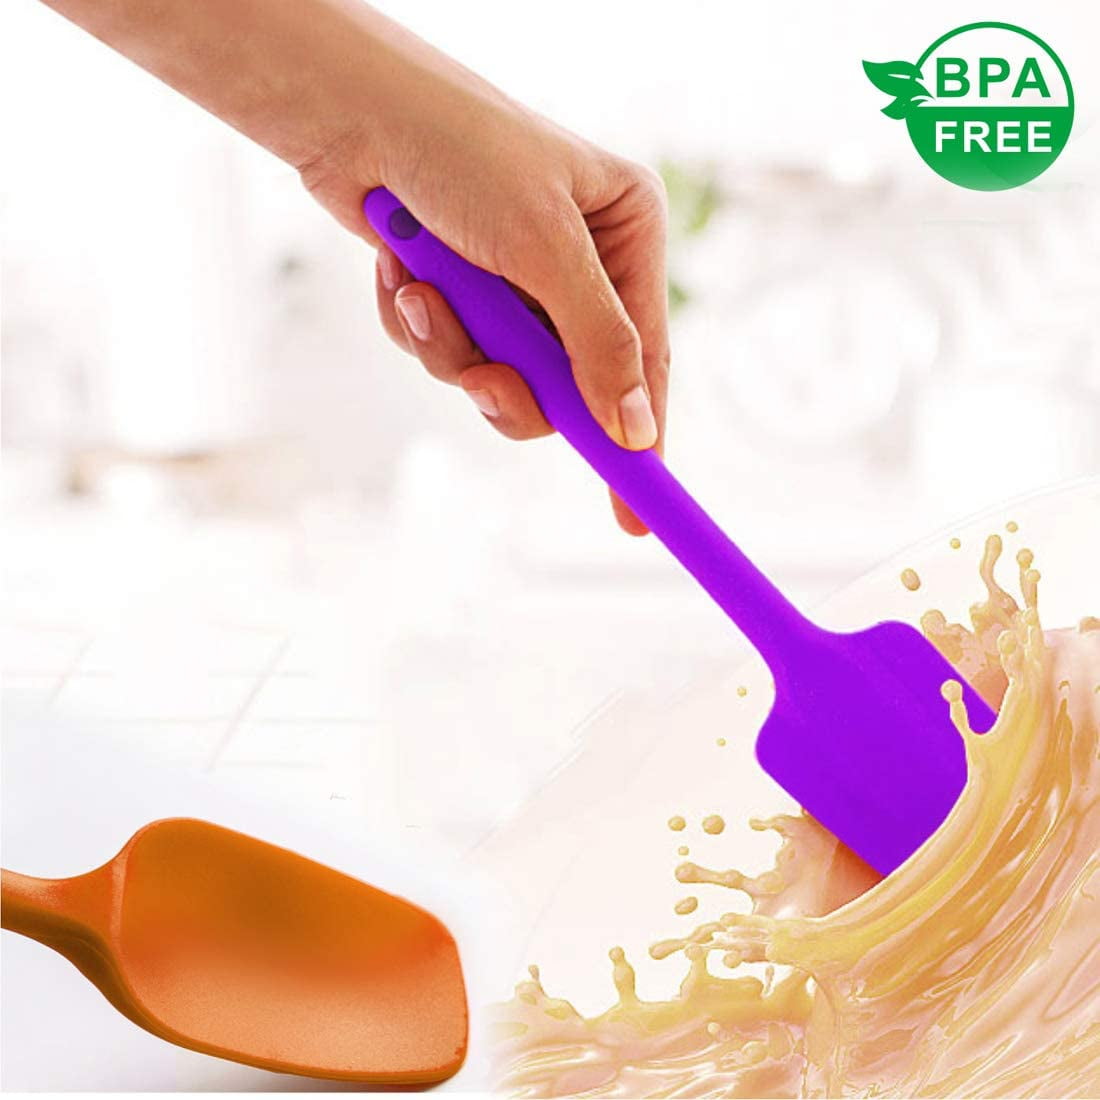 oannao Silicone Cooking Utensils Set - 446°F Heat Resistant